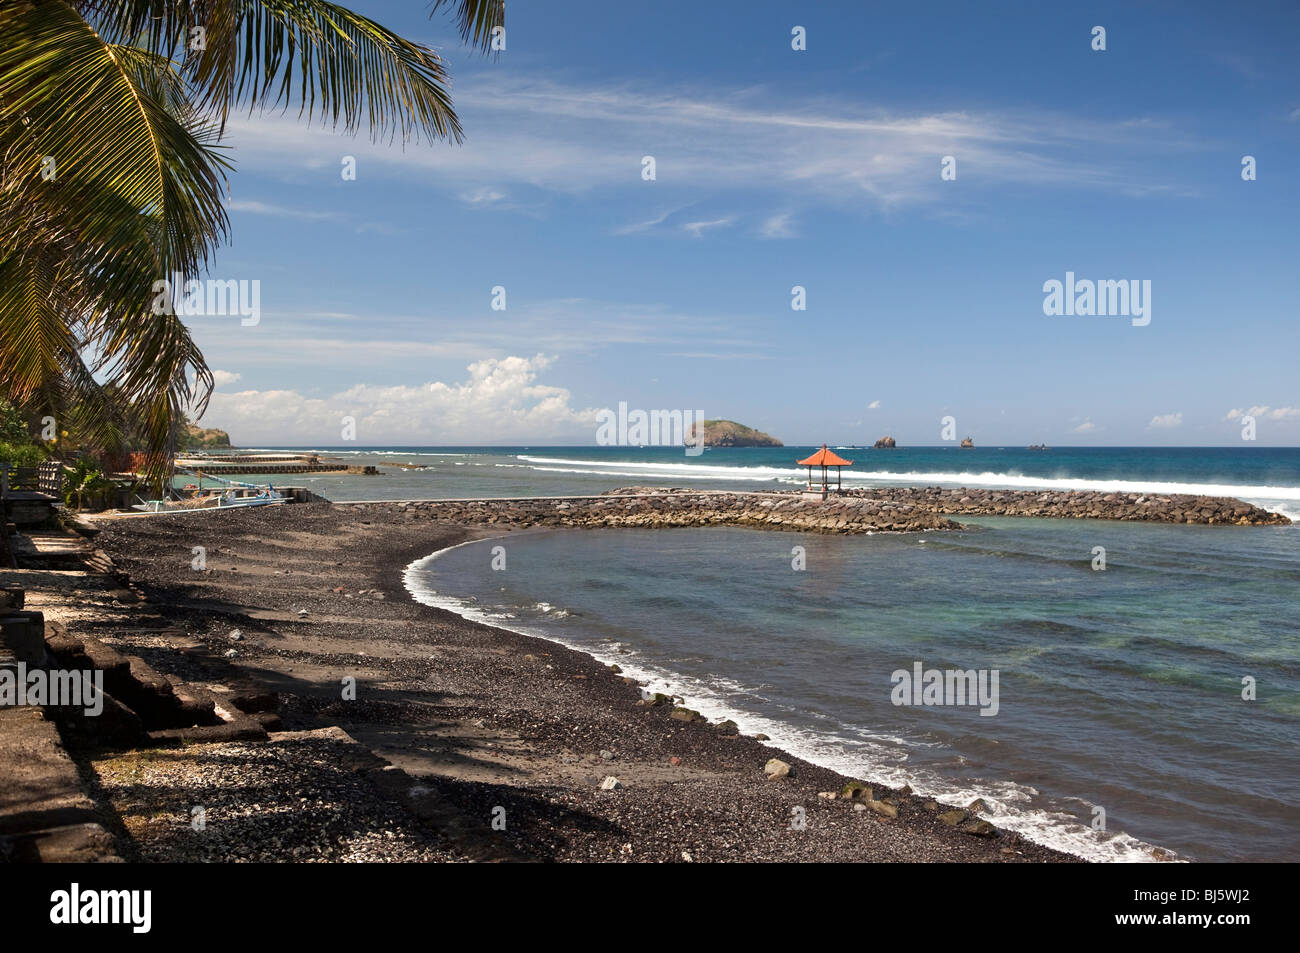 Indonesia, Bali, Candidasa, artificial breakwaters built to protect the beach remains Stock Photo